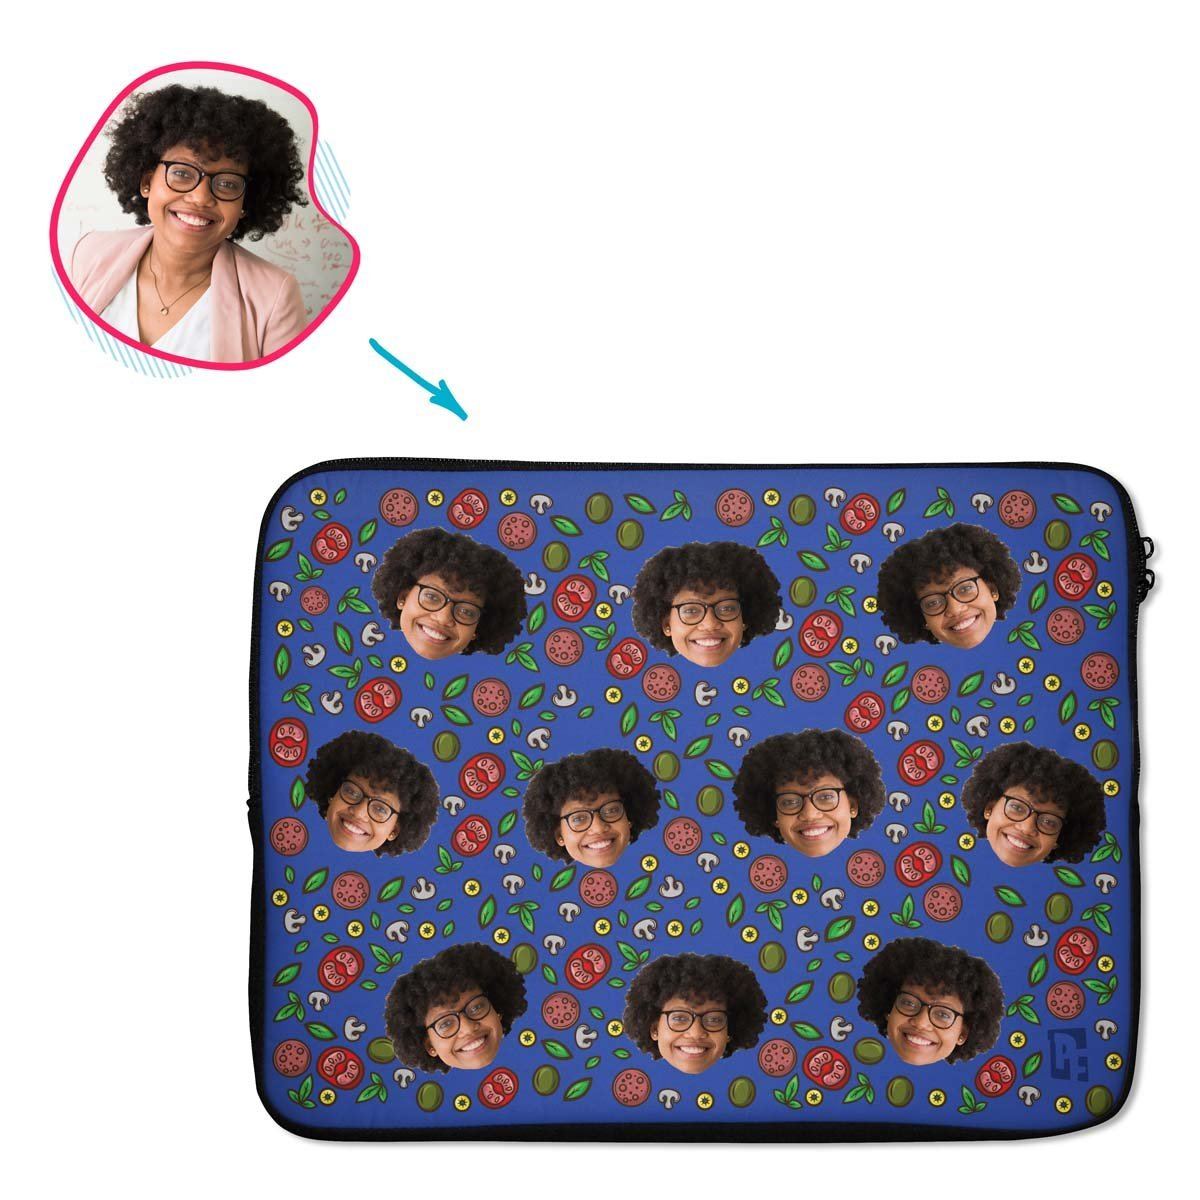 darkblue Pizza laptop sleeve personalized with photo of face printed on them